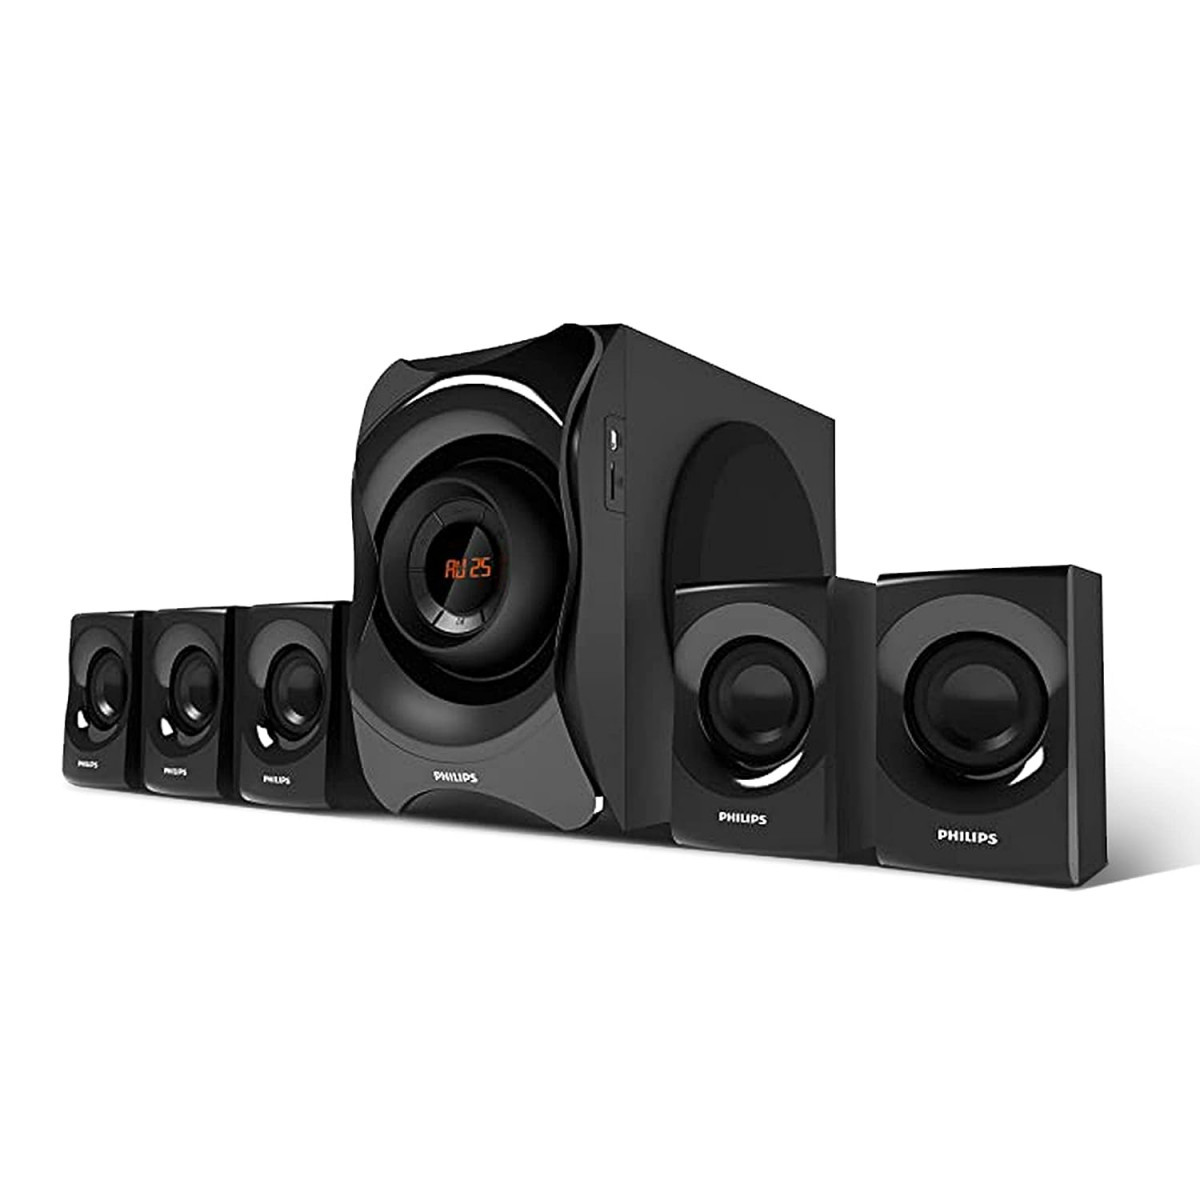 Philips Audio SPA8000B94 51 Channel Multimedia Speaker System with Bluetooth 5x15W Satellite Speakers LED Display Robust Design  Matte Finish Black